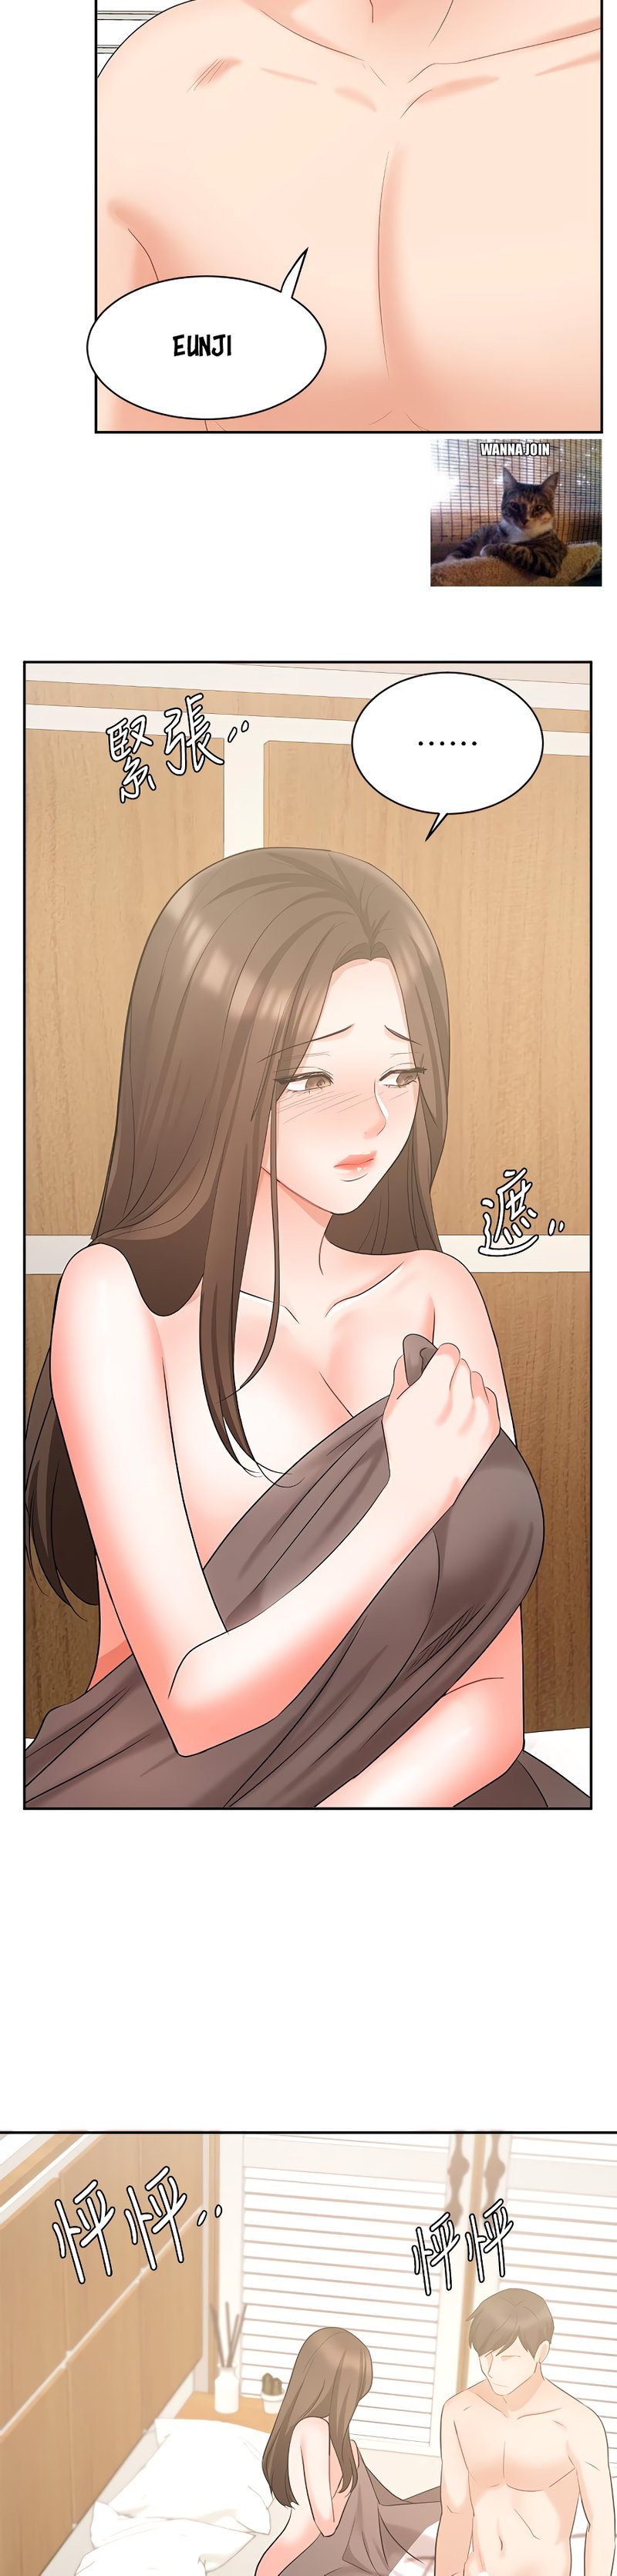 sold-out-girl-chap-43-43